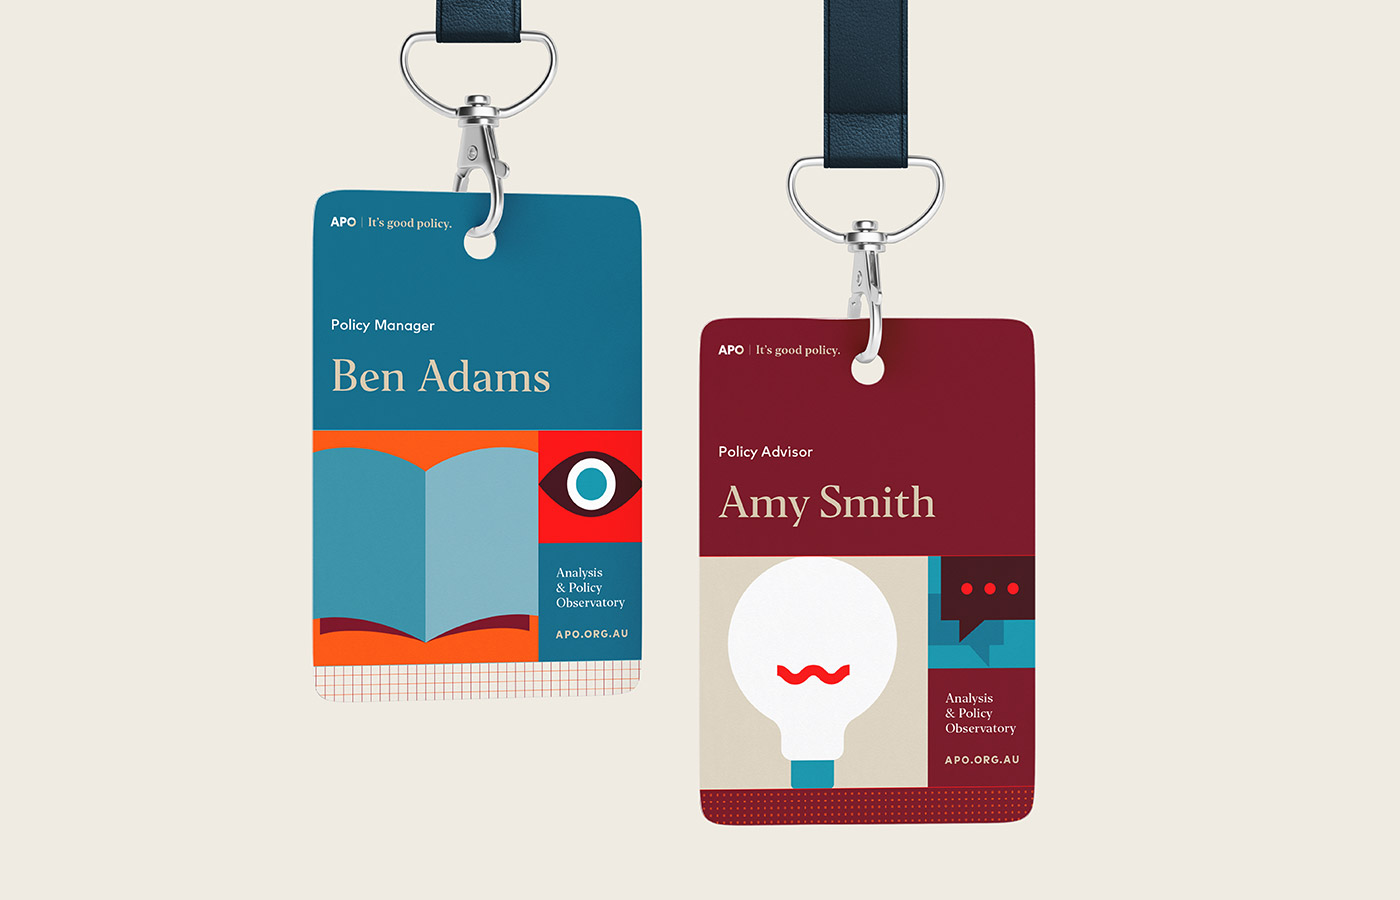 A set of blue and maroon APO name tags